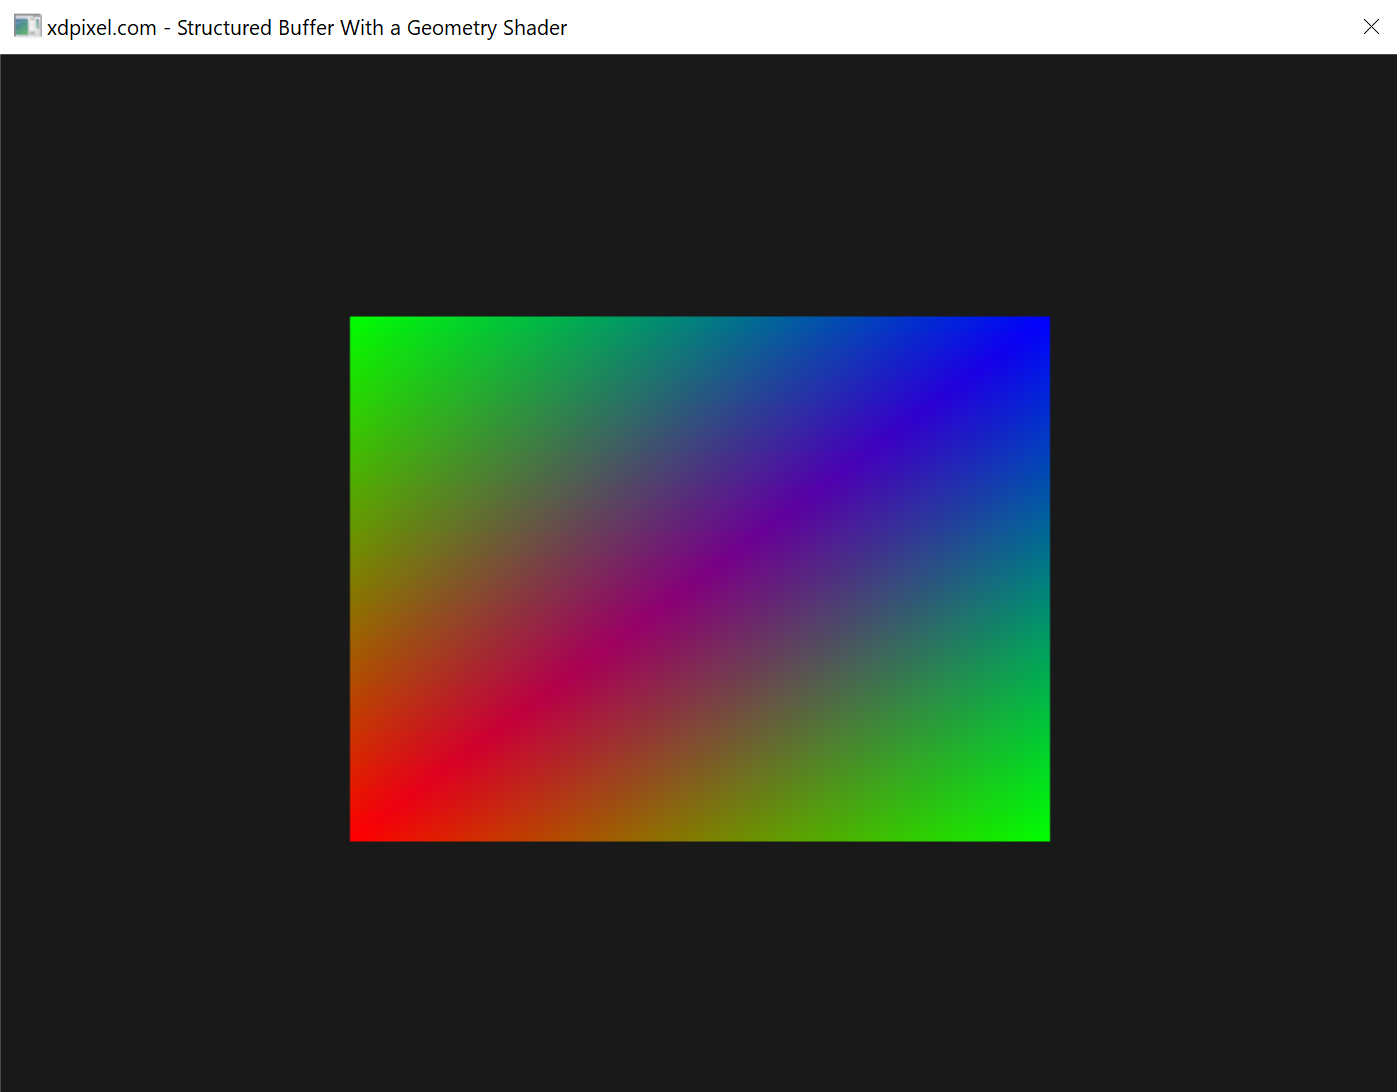 DirectX11 Geometry Shader with a Structured Buffer